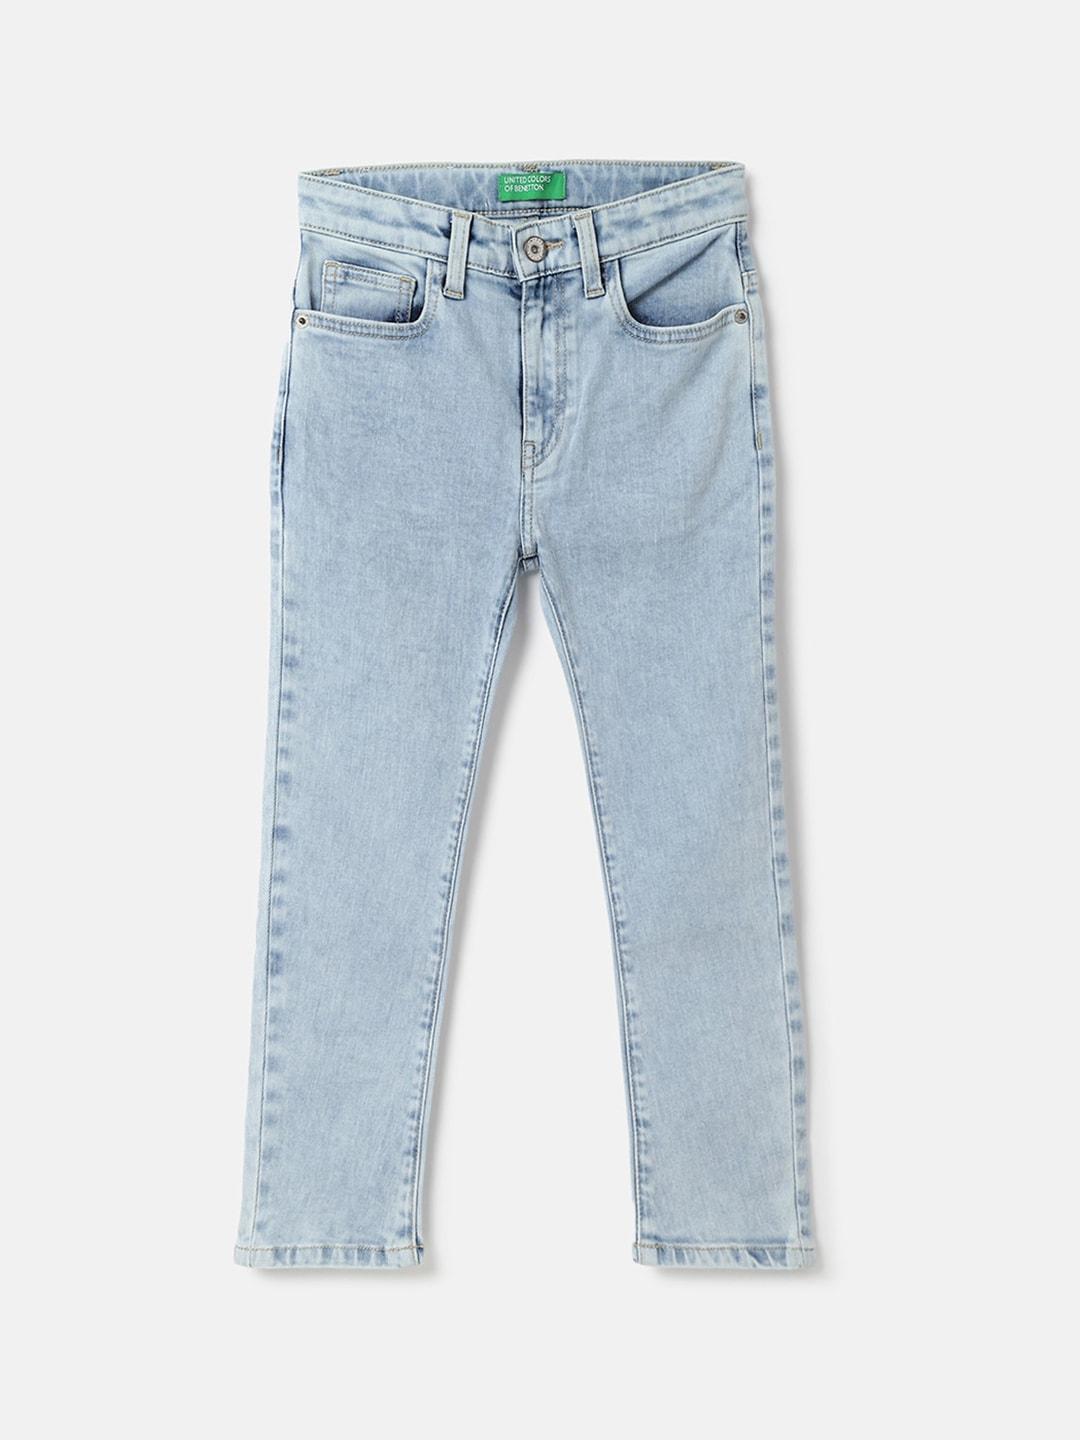 United Colors of Benetton Boys Heavy Fade Jeans